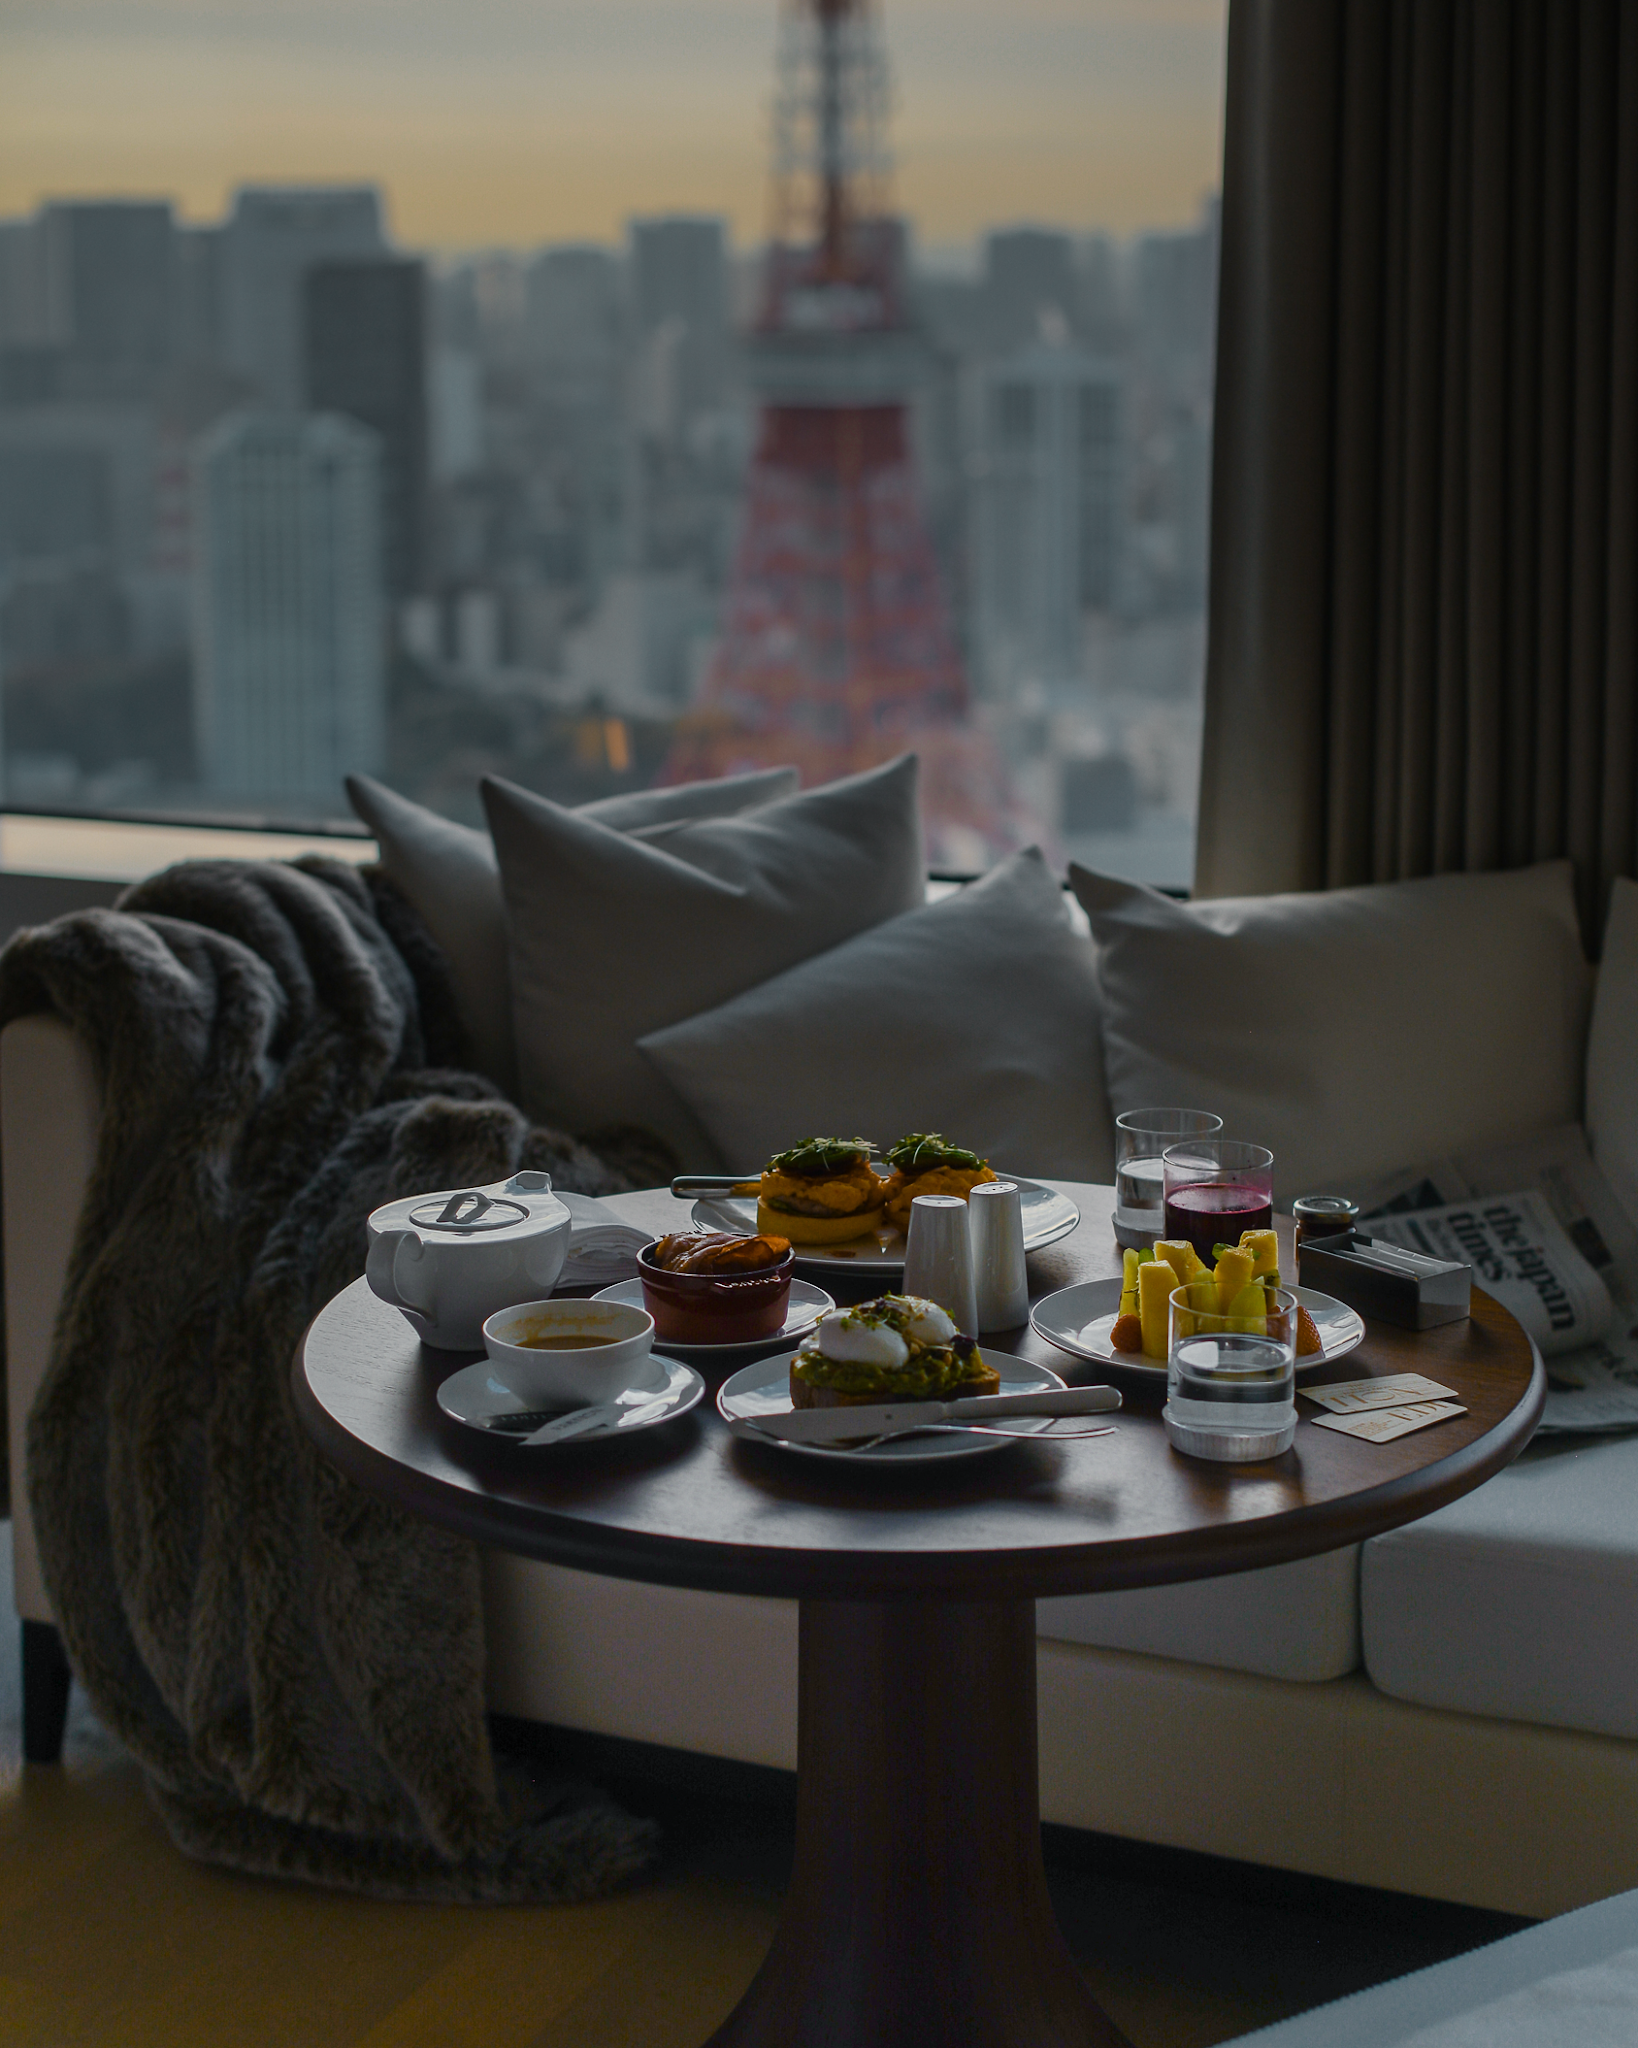 Breakfast with Tokyo Tower view, Best new hotel in Tokyo 2020, Staycation at the Tokyo Edition Toranomon,  hotel staycation in Tokyo, Japan newest hotels, Tokyo Tower view hotels in Japan, best Tokyo skyline view with Tokyo Tower / FOREVERVANNY Travel and Style by Van Le